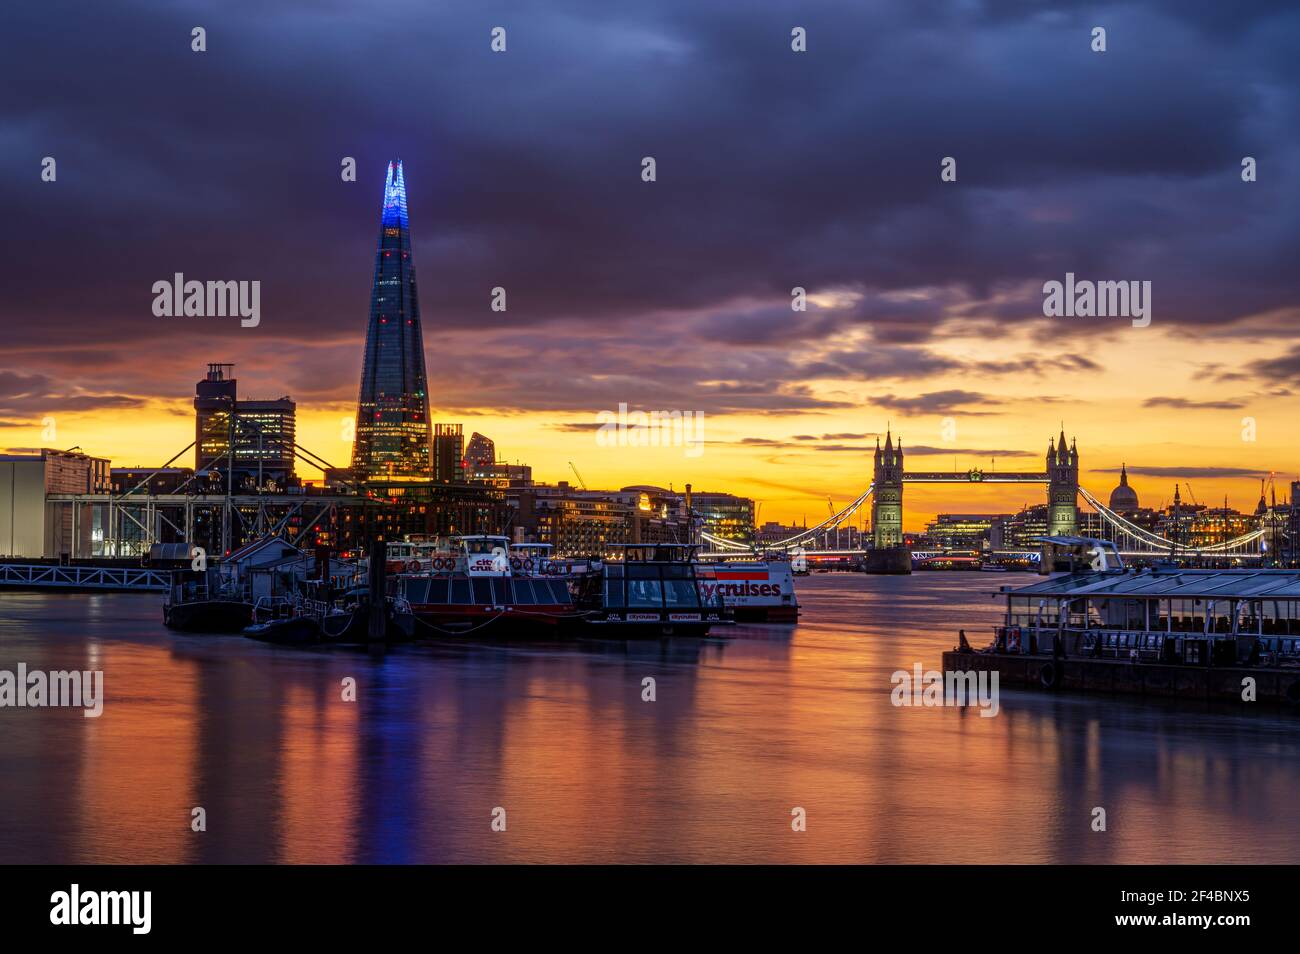 London, England, UK - March 19, 2021: Panoramic view of the city of London with a colorful sunset reflected into the Thames River Stock Photo